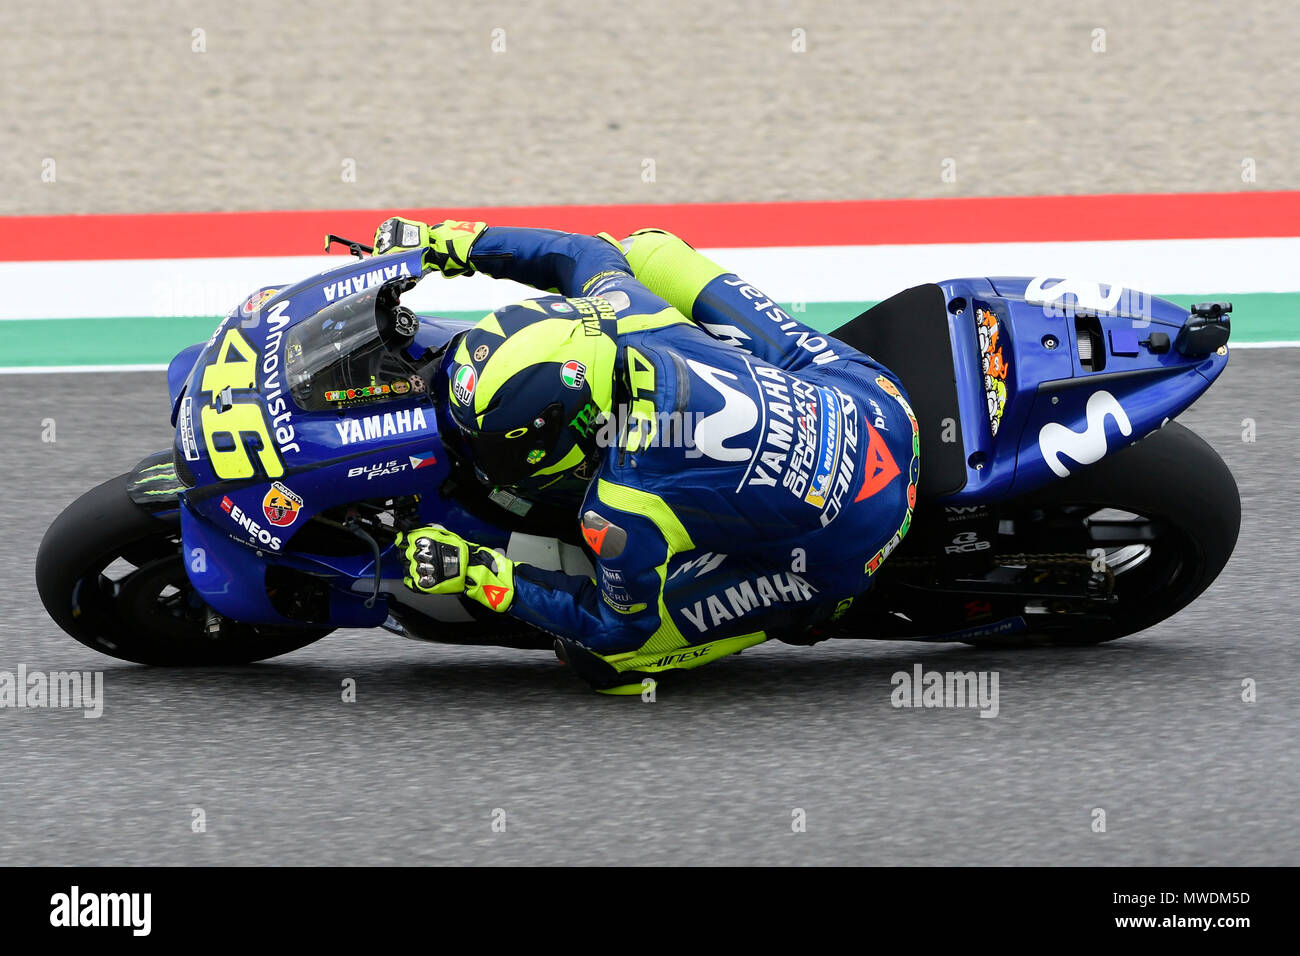 Florence, Italy. 31st May 2018. Valentino Rossi of Italy and Movistar Yamaha MotoGP in action during FP MotoGP Gran Premio dItalia Oakley-at Mugello Circuit